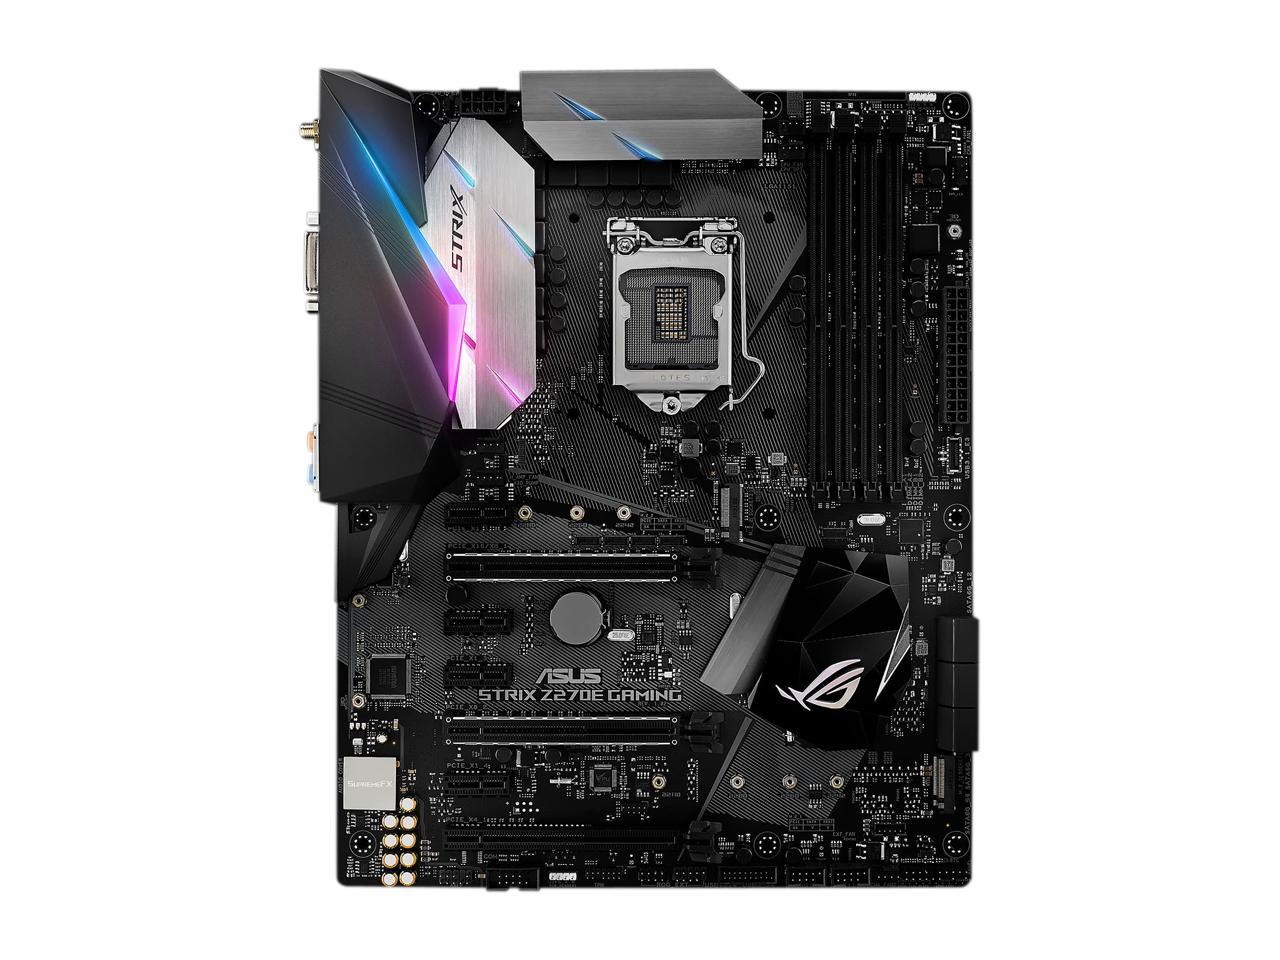 ASUS ROG STRIX Z270E GAMING LGA1151 DDR4 DP HDMI DVI M.2 ATX Motherboard with Onboard AC Wi-Fi and USB 3.1